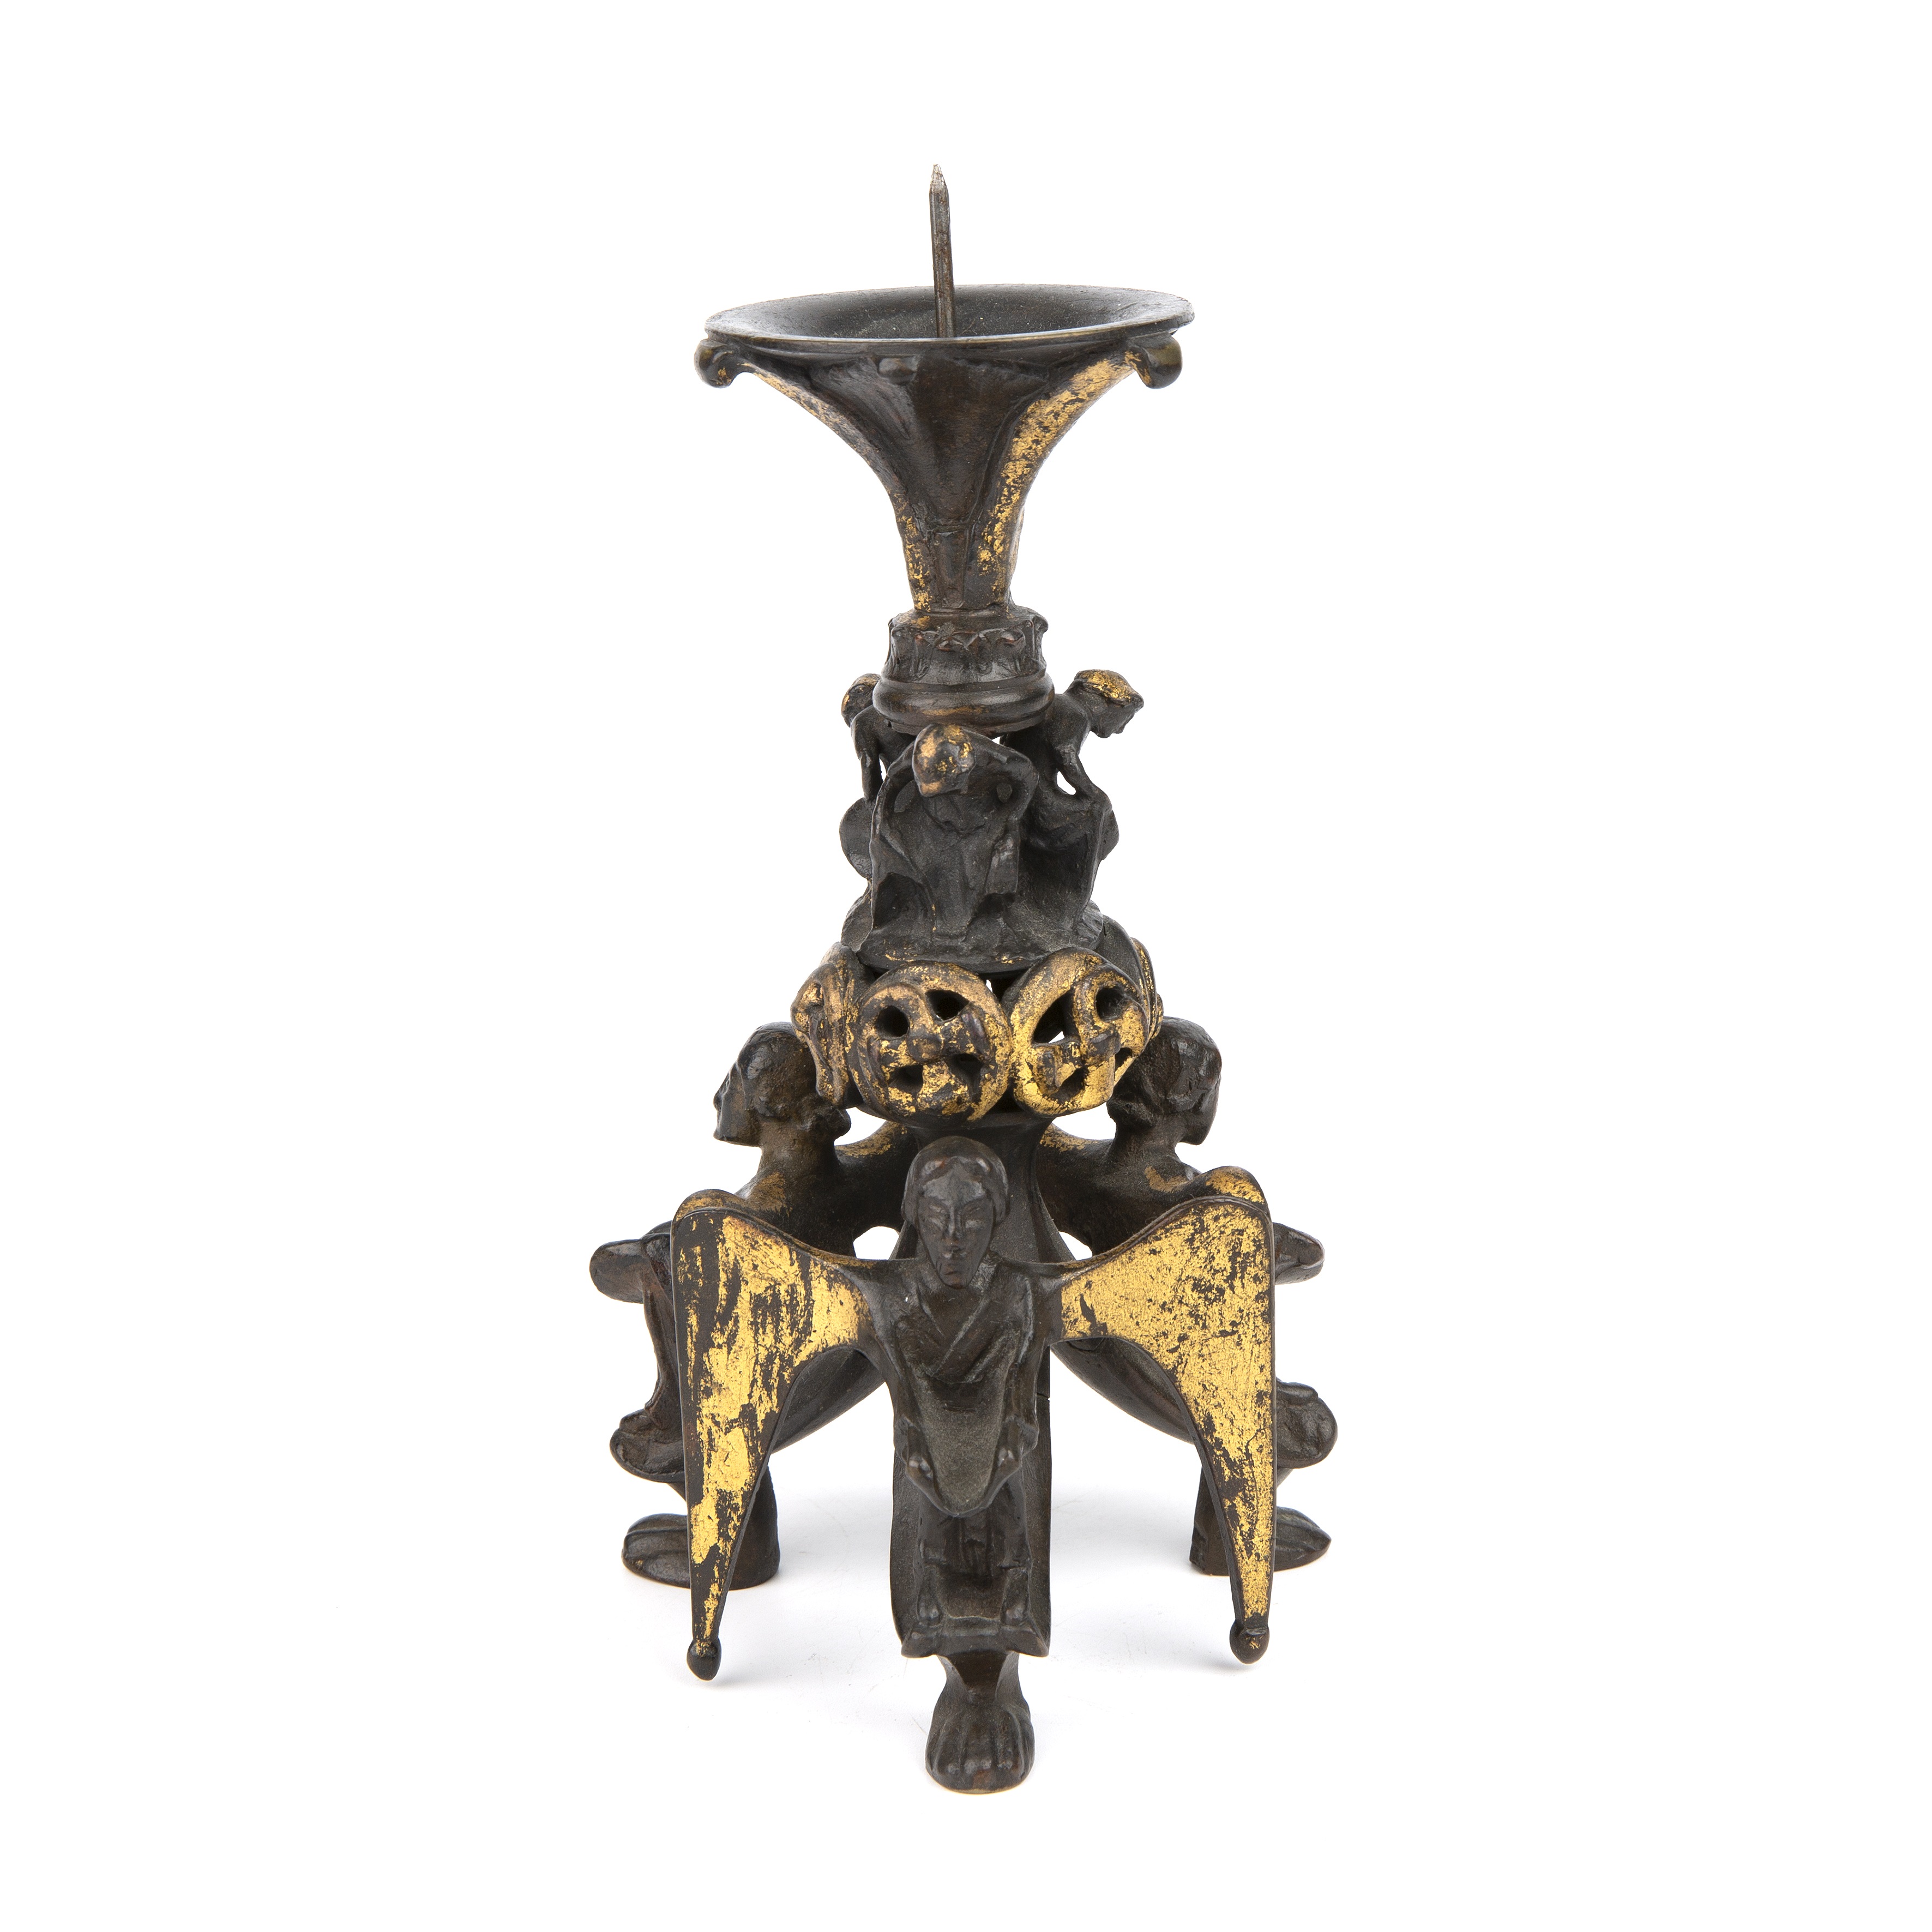 A bronze gothic pricket candlestick in the manner of Auguste Maximillien Delafontaine (1813-1892)